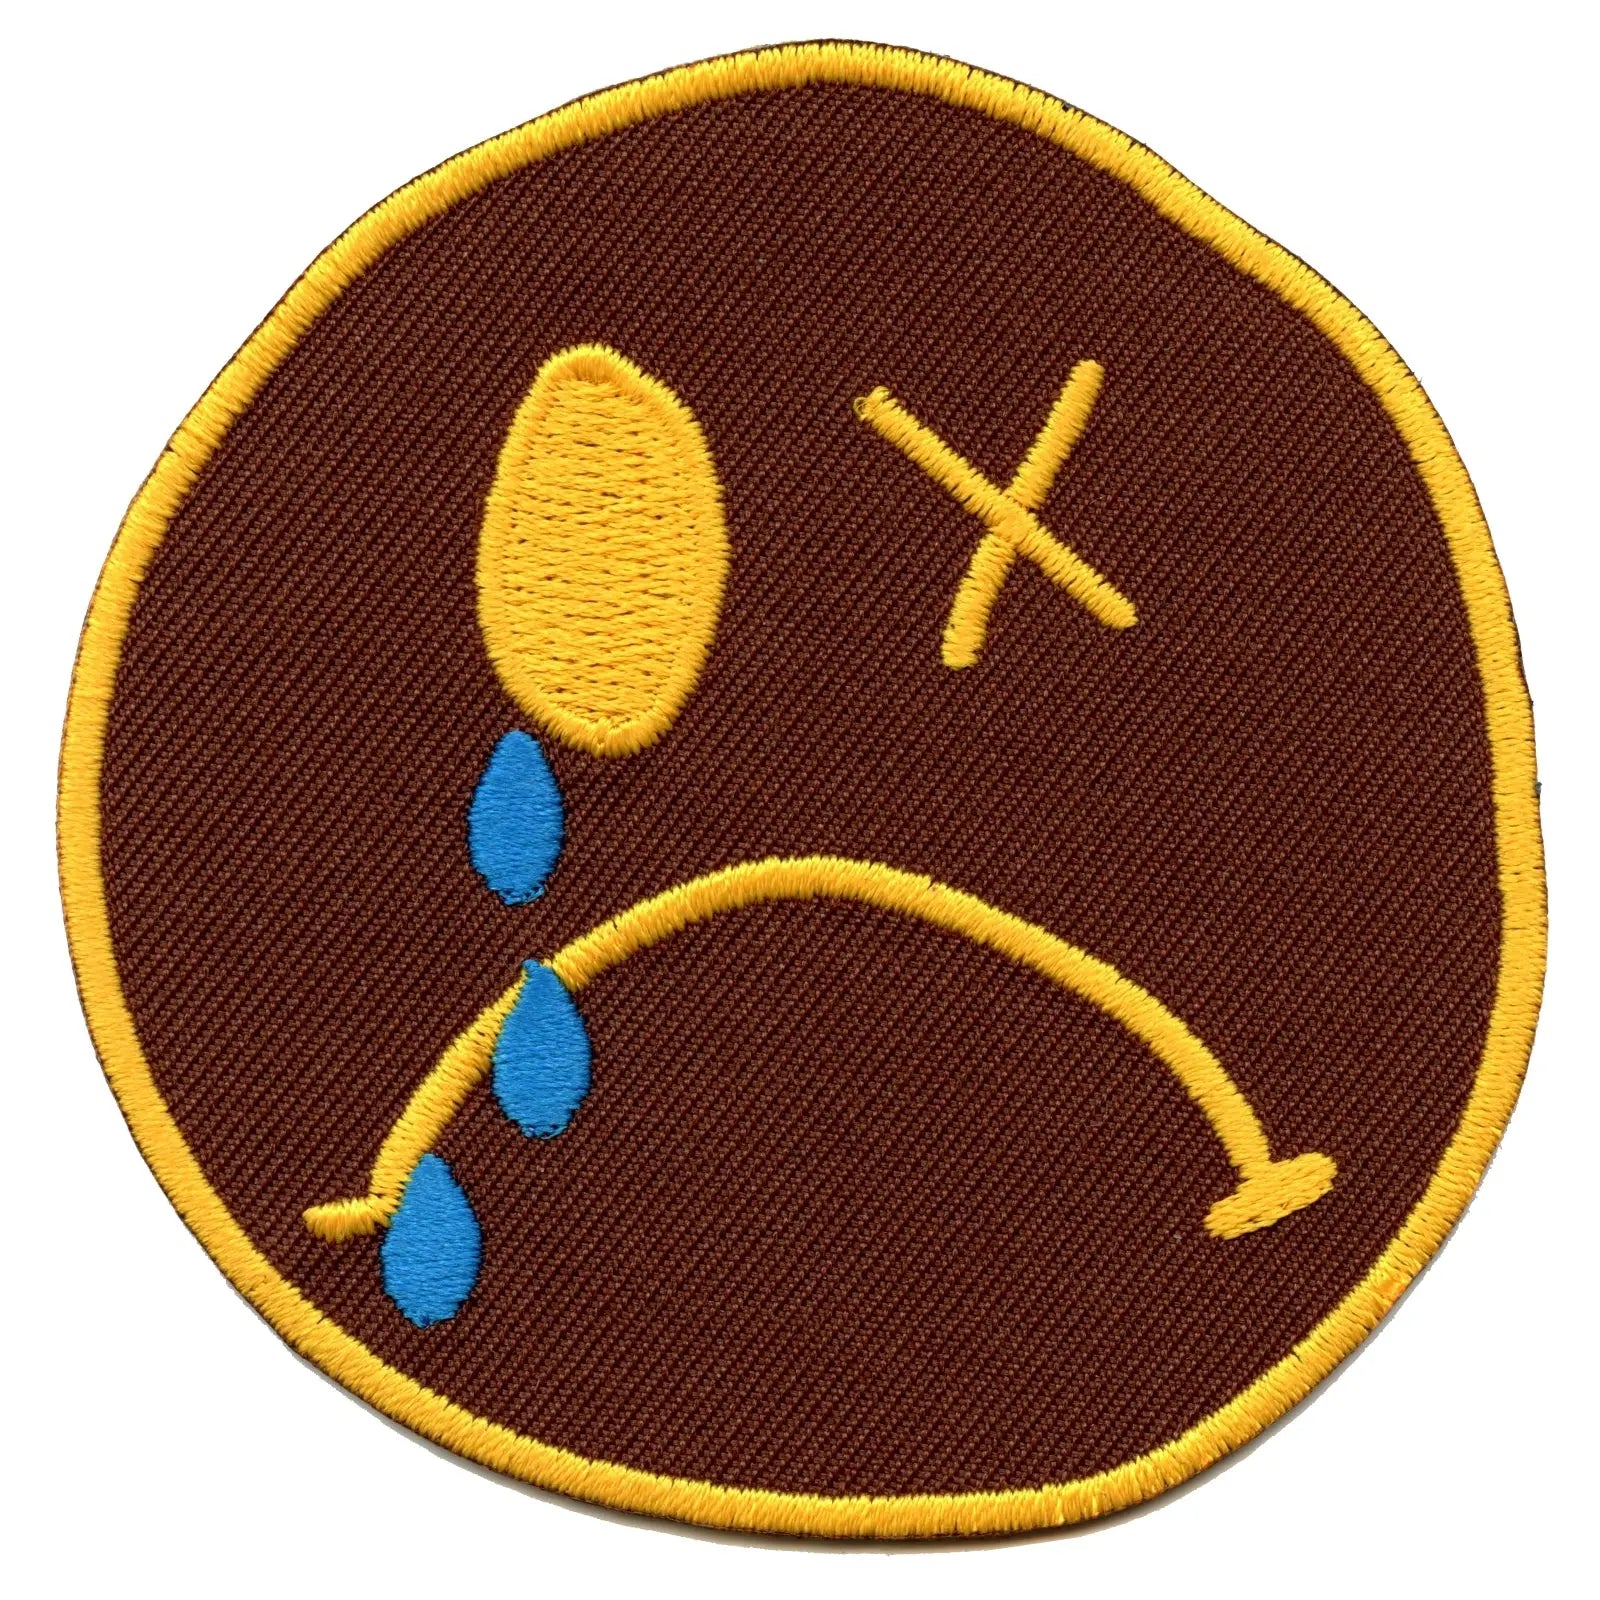 Crying Sad Face Emoji Iron On Embroidered Patch 